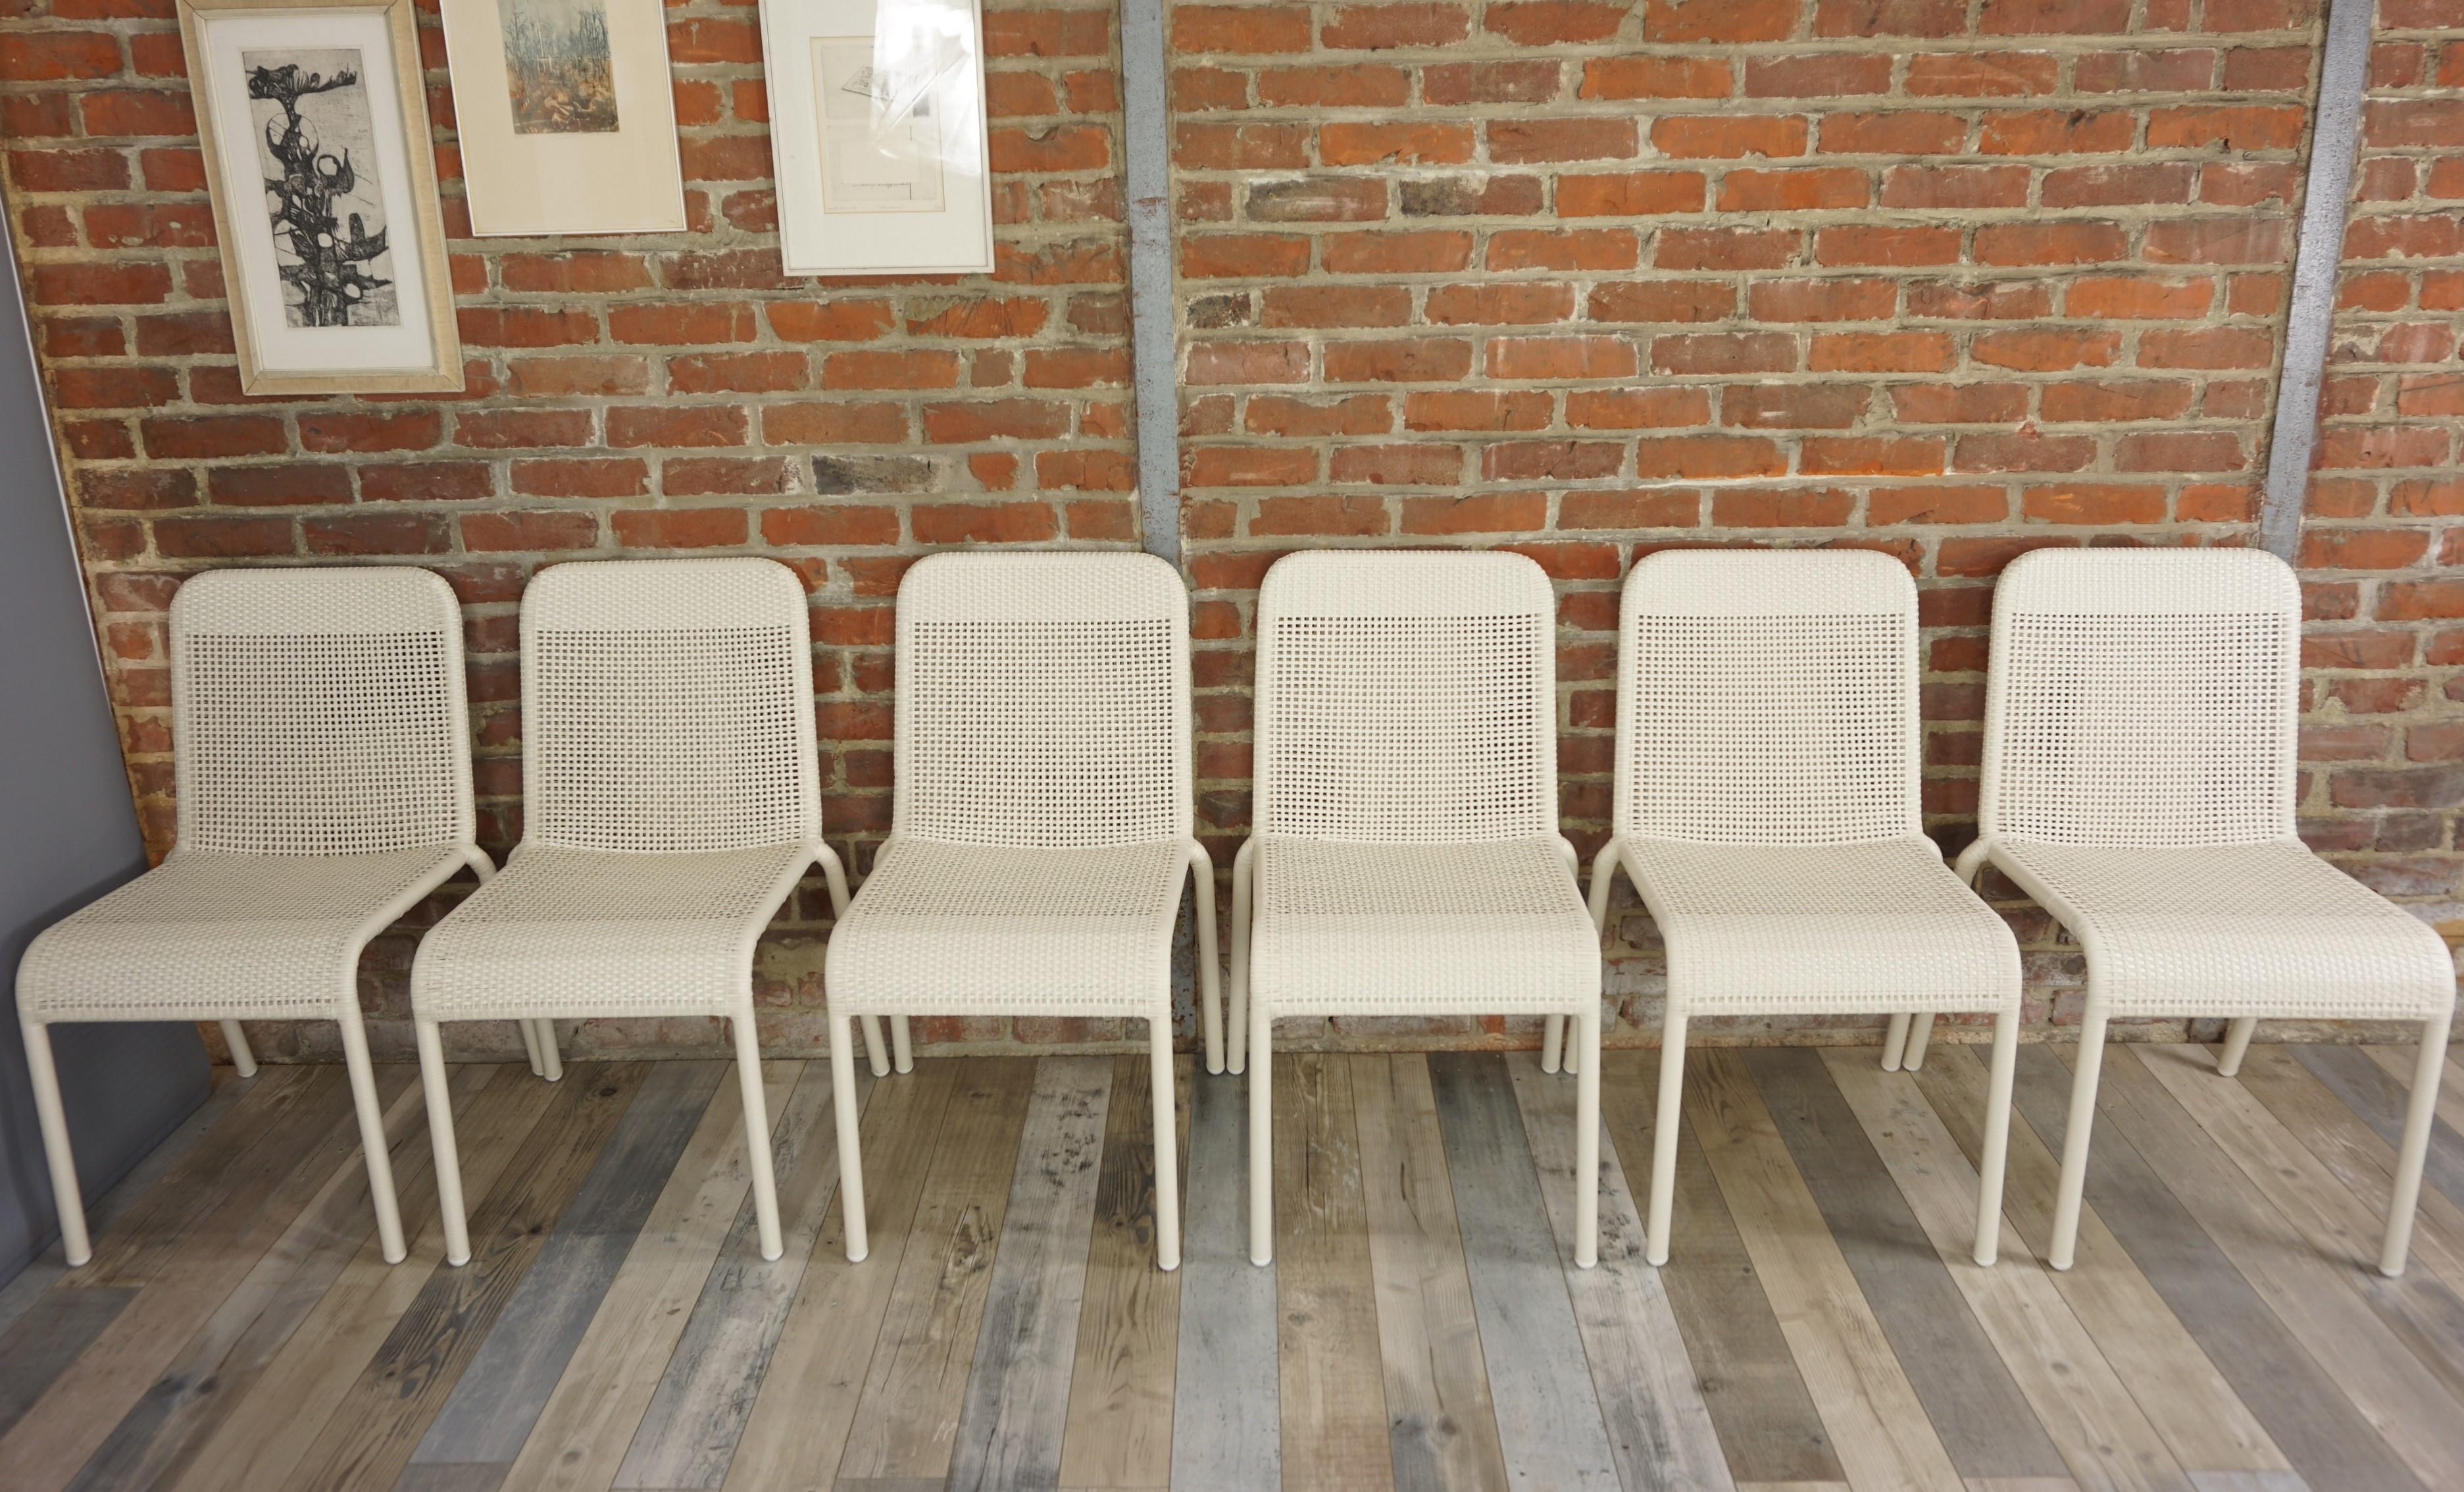 Set of six white braided resin chairs indoor/outdoor. Design and retro style, practical (stackable!) They will be perfect on your terrace, in your veranda, around the swimming-pool, your winter garden, even around the dining table! New items, never